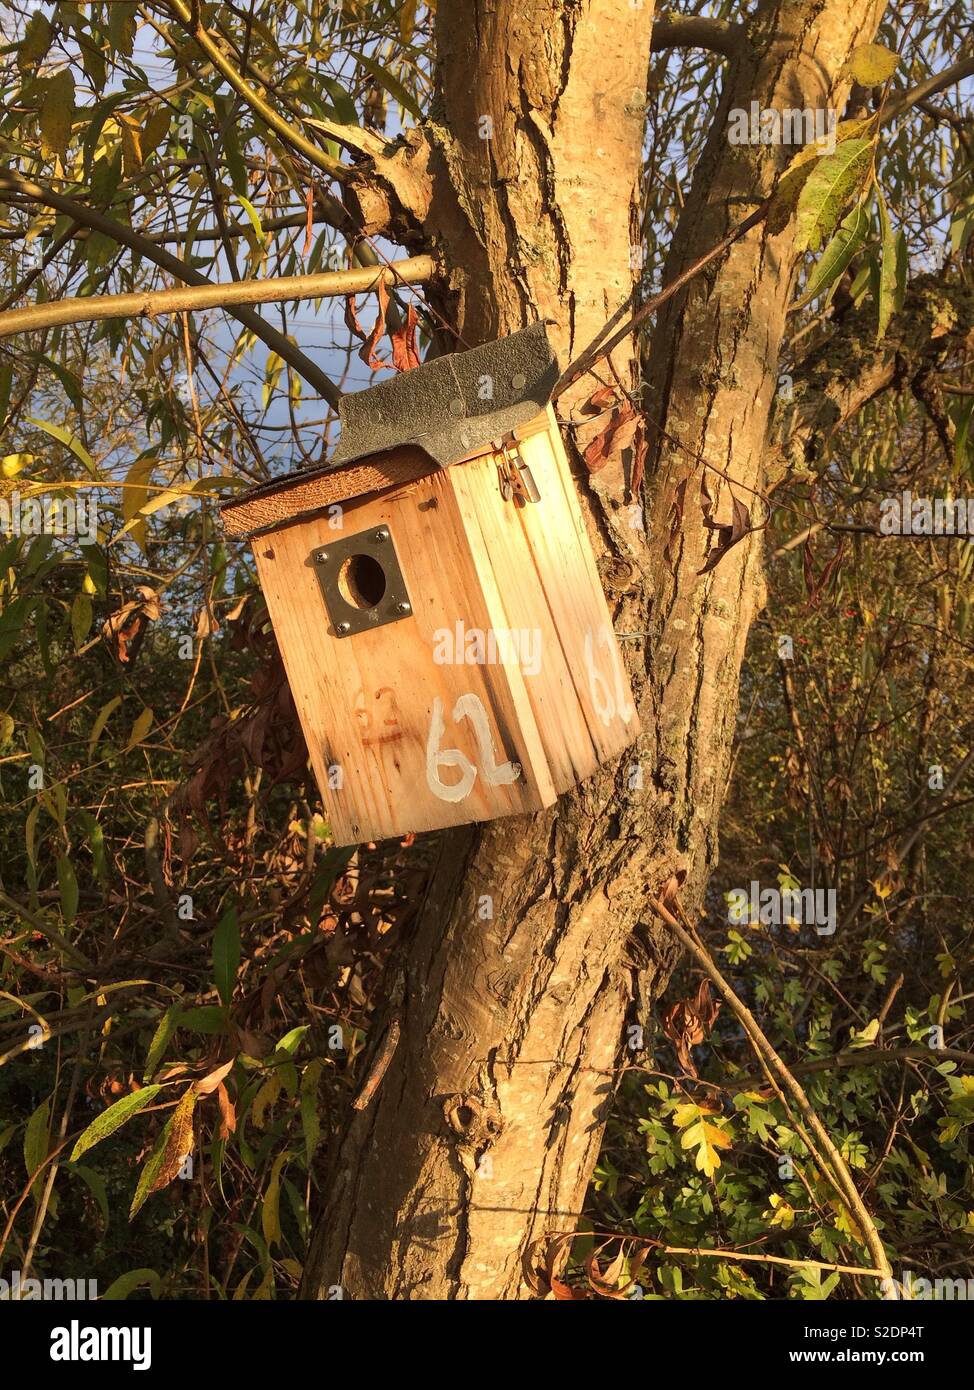 A bird box fixed to a willow tree at Walthamstow Wetlands, an urban nature reserve in London, UK Stock Photo